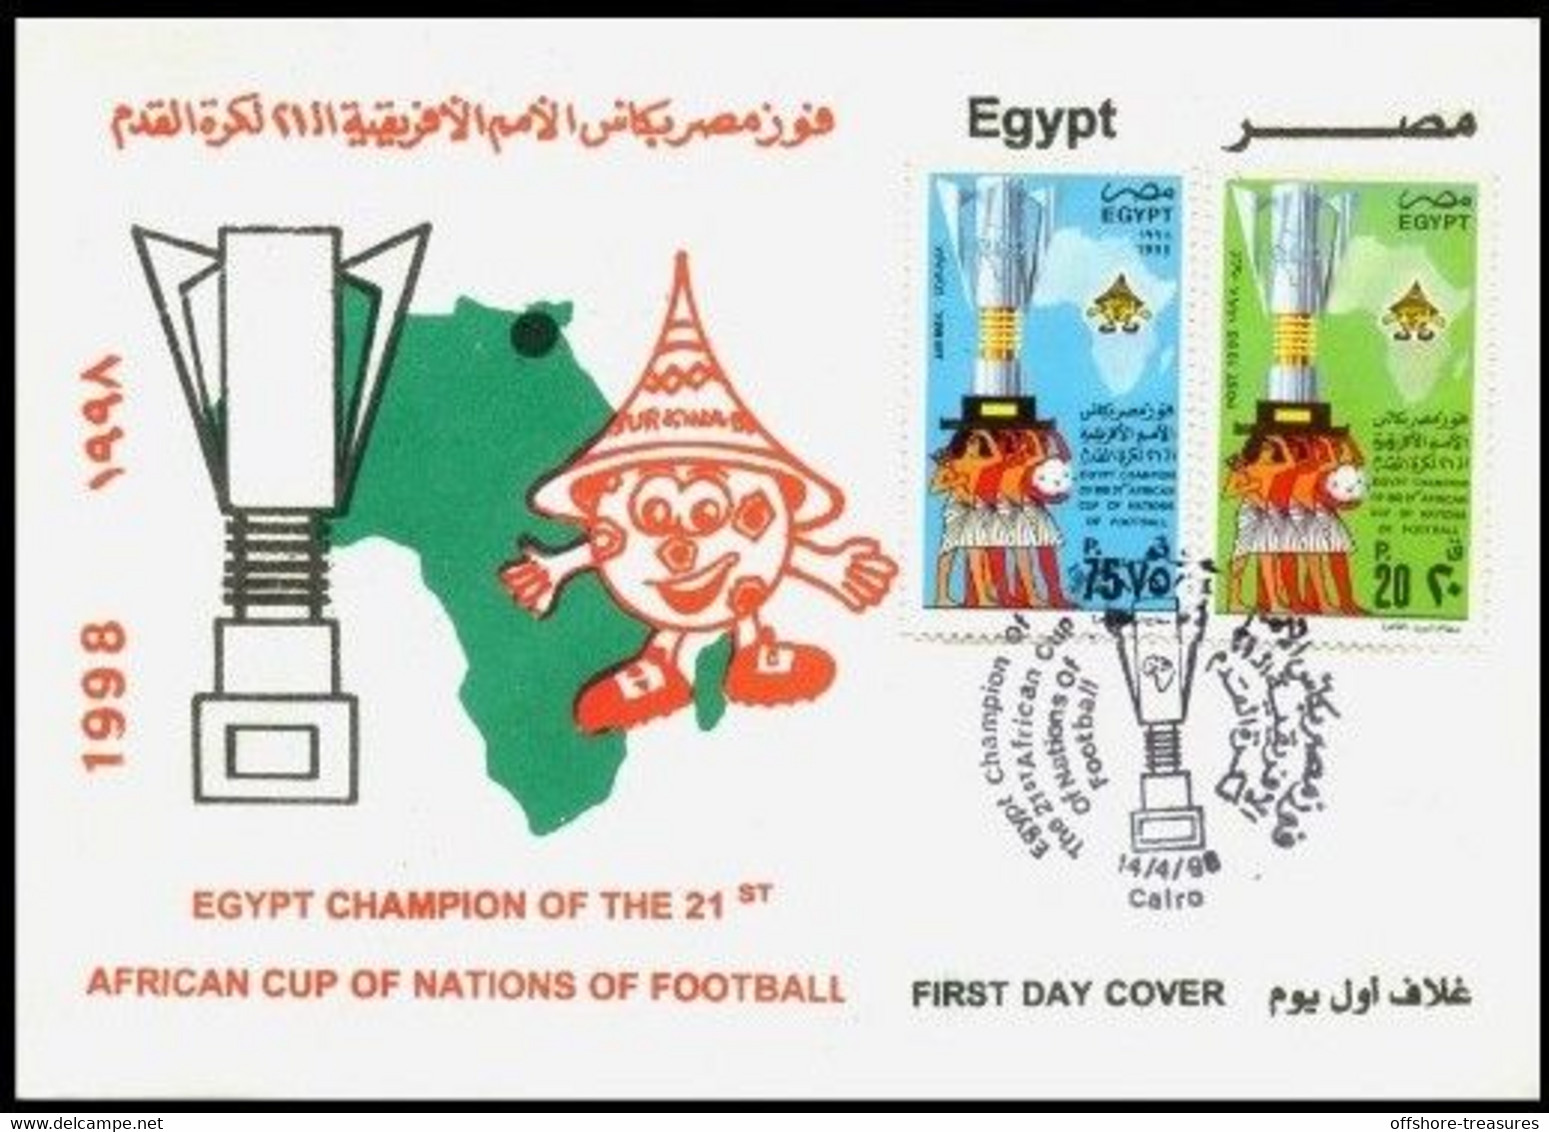 Egypt FOOTBALL WINNER 1998 First Day Cover - FDC 2 Stamps 75P & 20P AFRICAN NATIONS CUP BURKINA FASO - Lettres & Documents